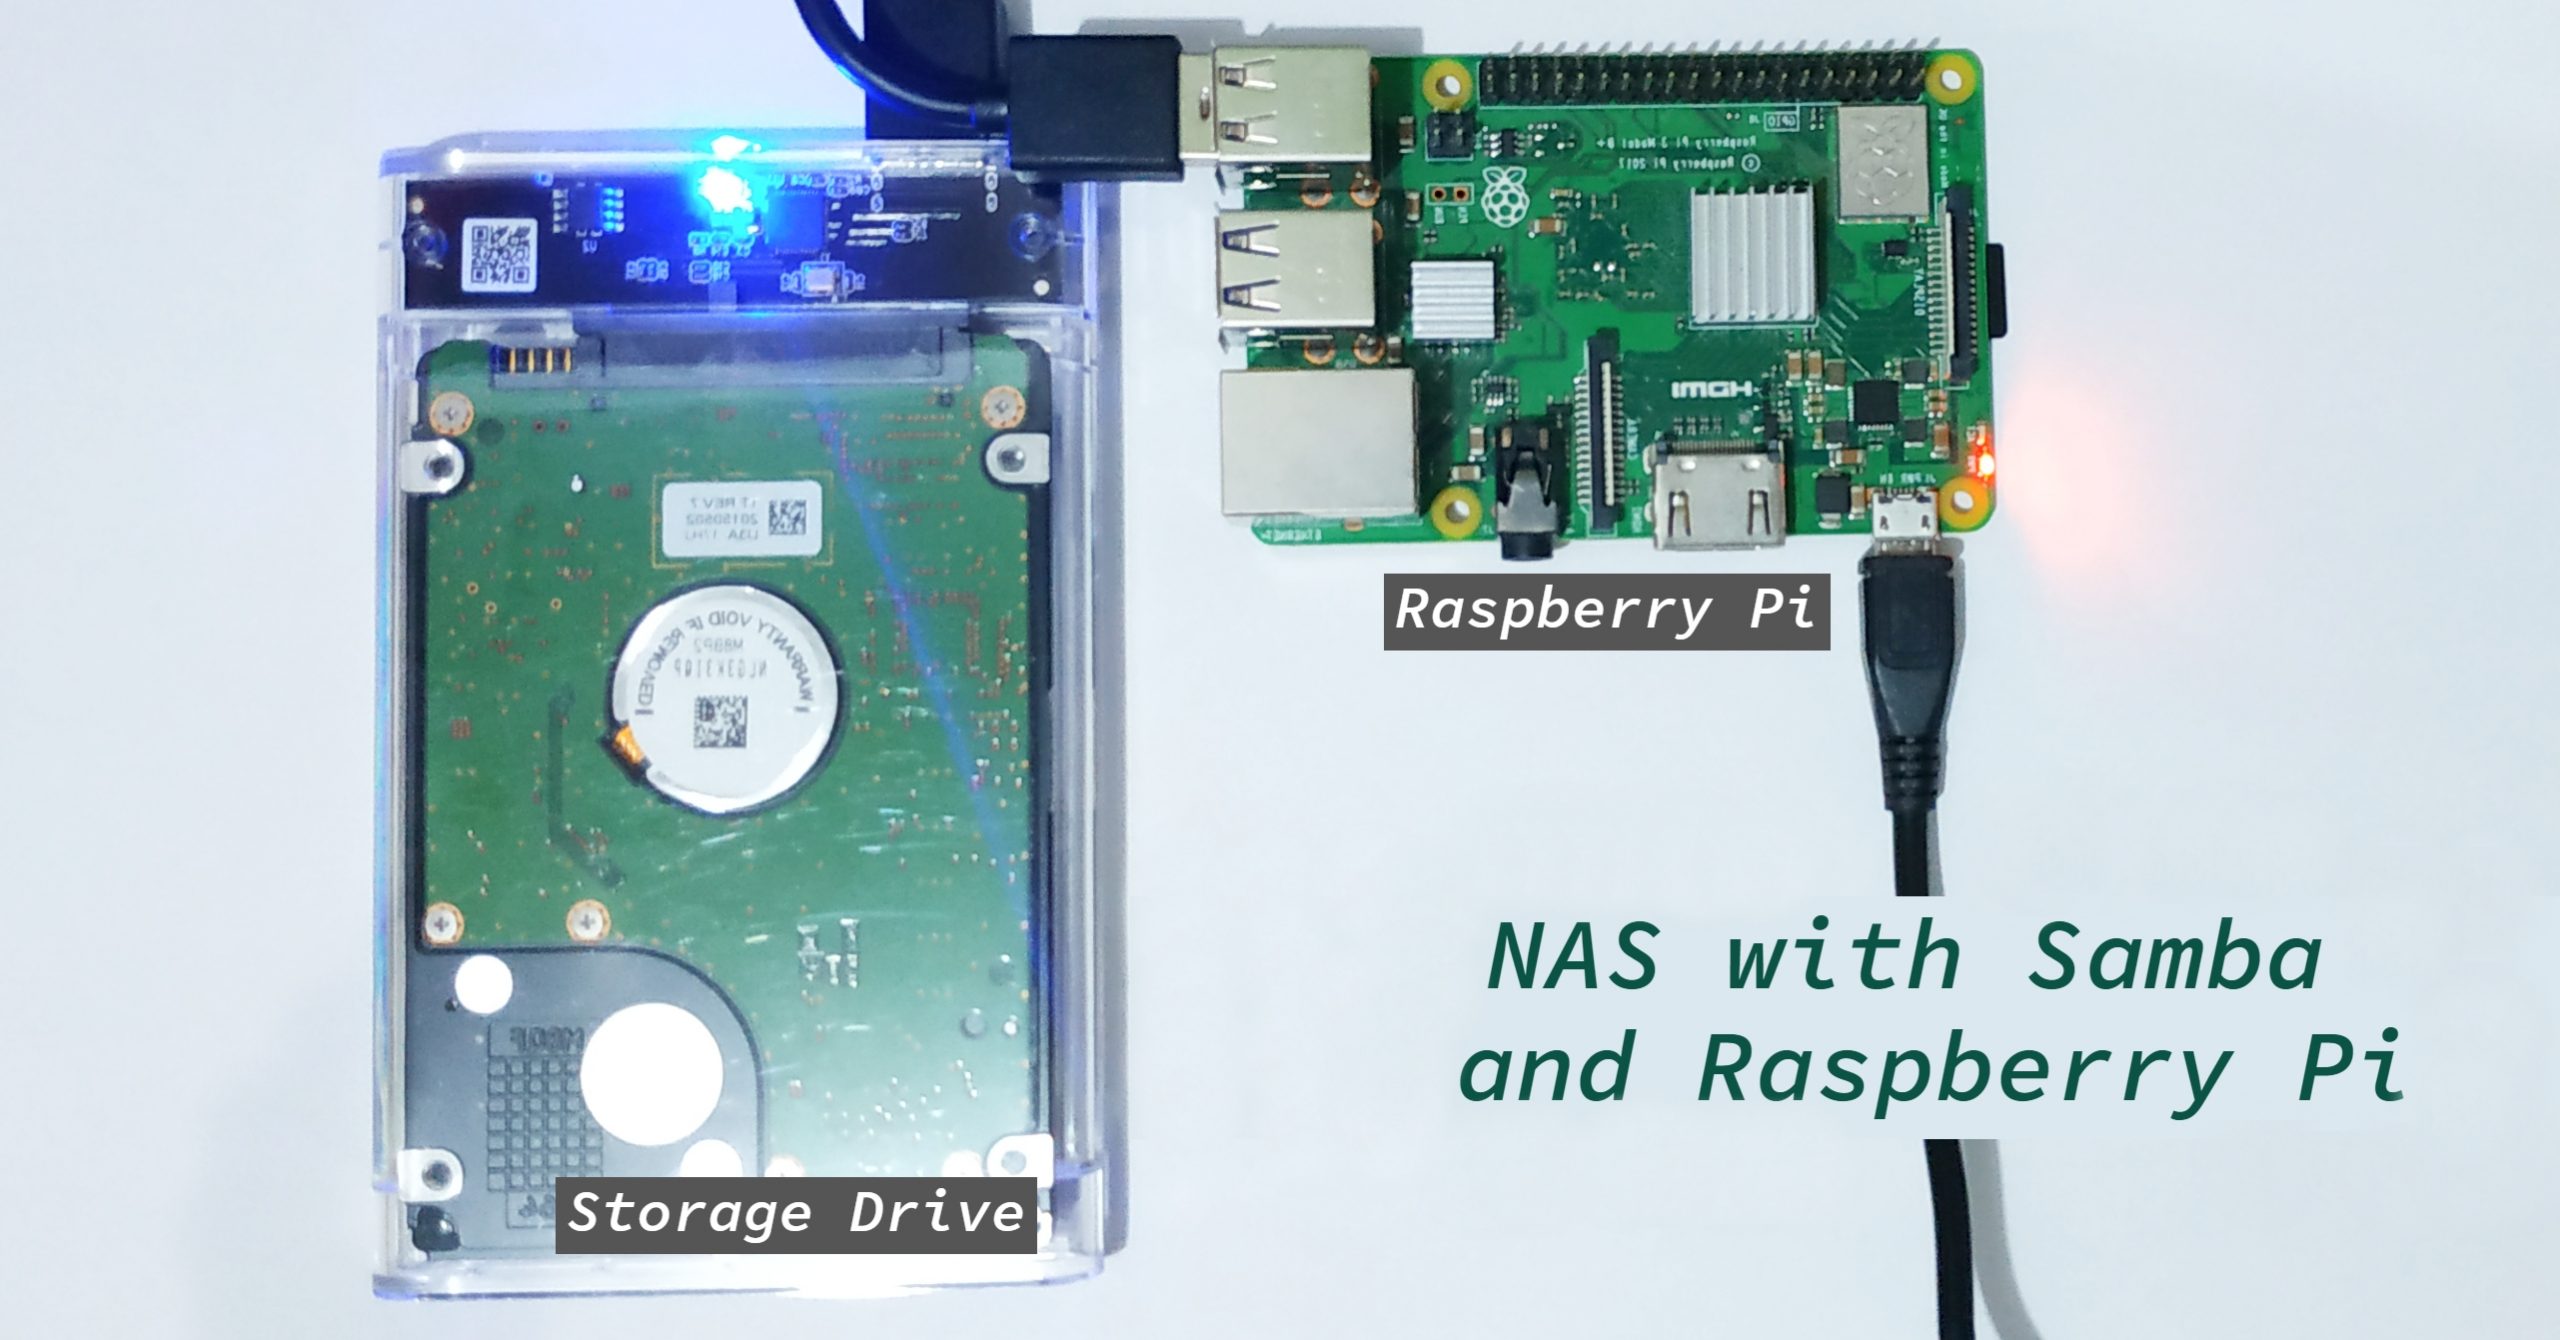 Build a Remote Storage Device with the Raspberry Pi